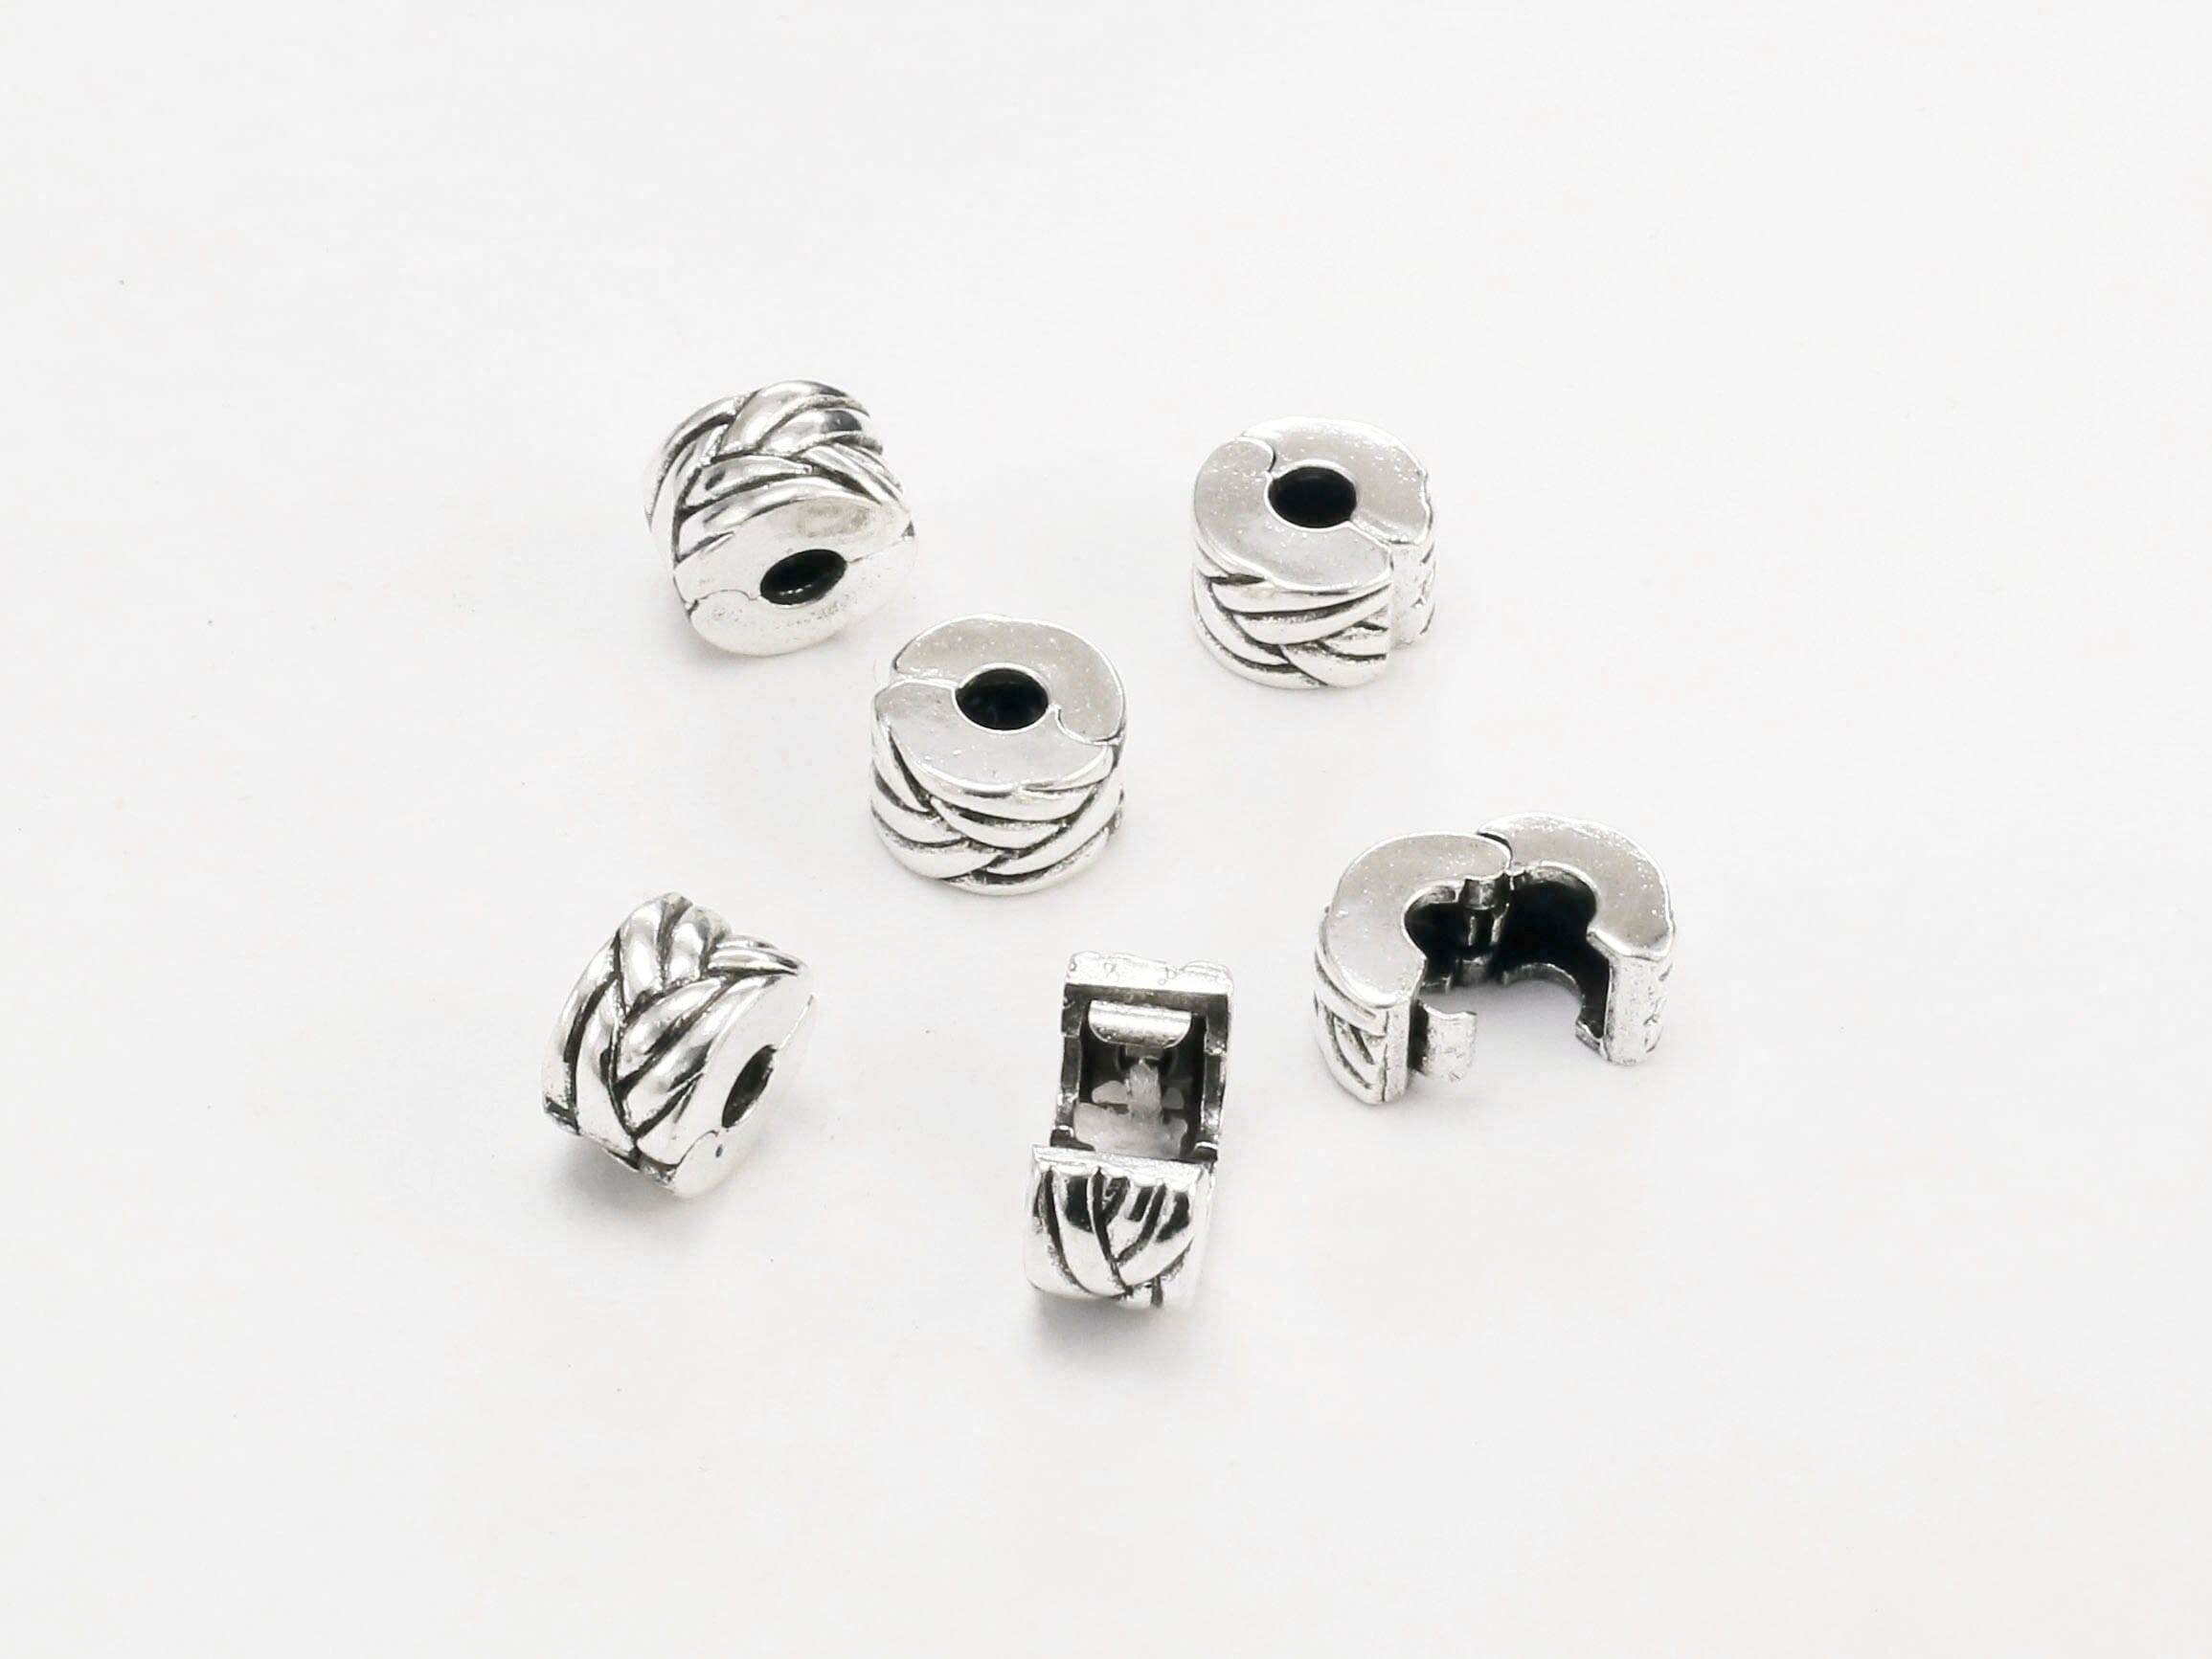 Spacer Beads For Jewelry Making Pendant Clips, Clasps, Connectors For  Bracelets And Toggle Necklace From Bead118, $13.67